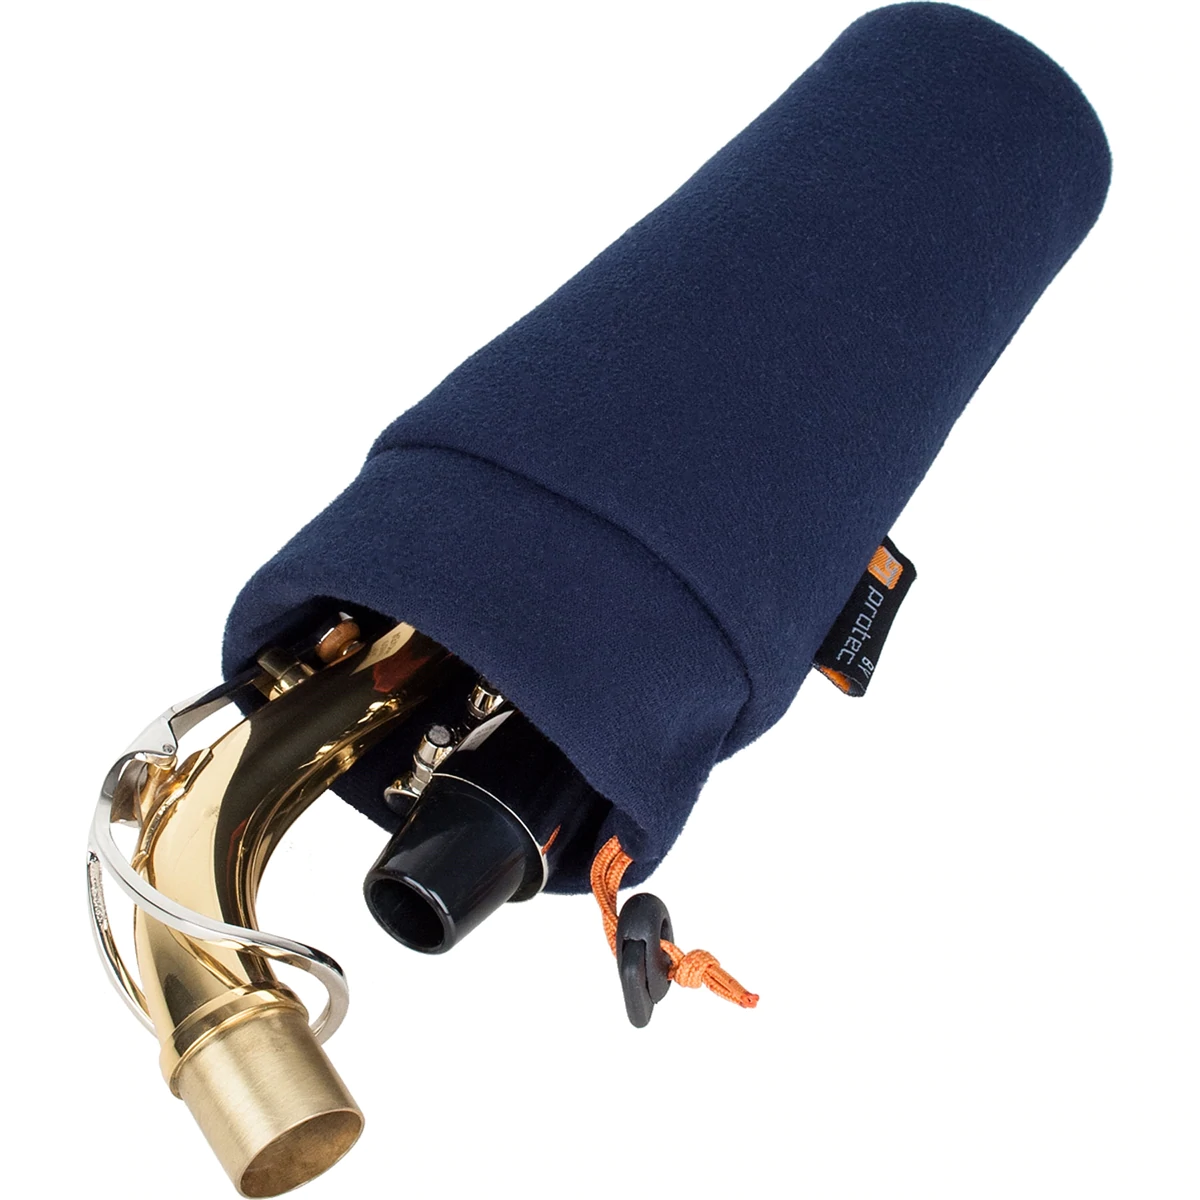 PROTEC Saxophone In-Bell Neck & Mouthpiece Storage Pouch